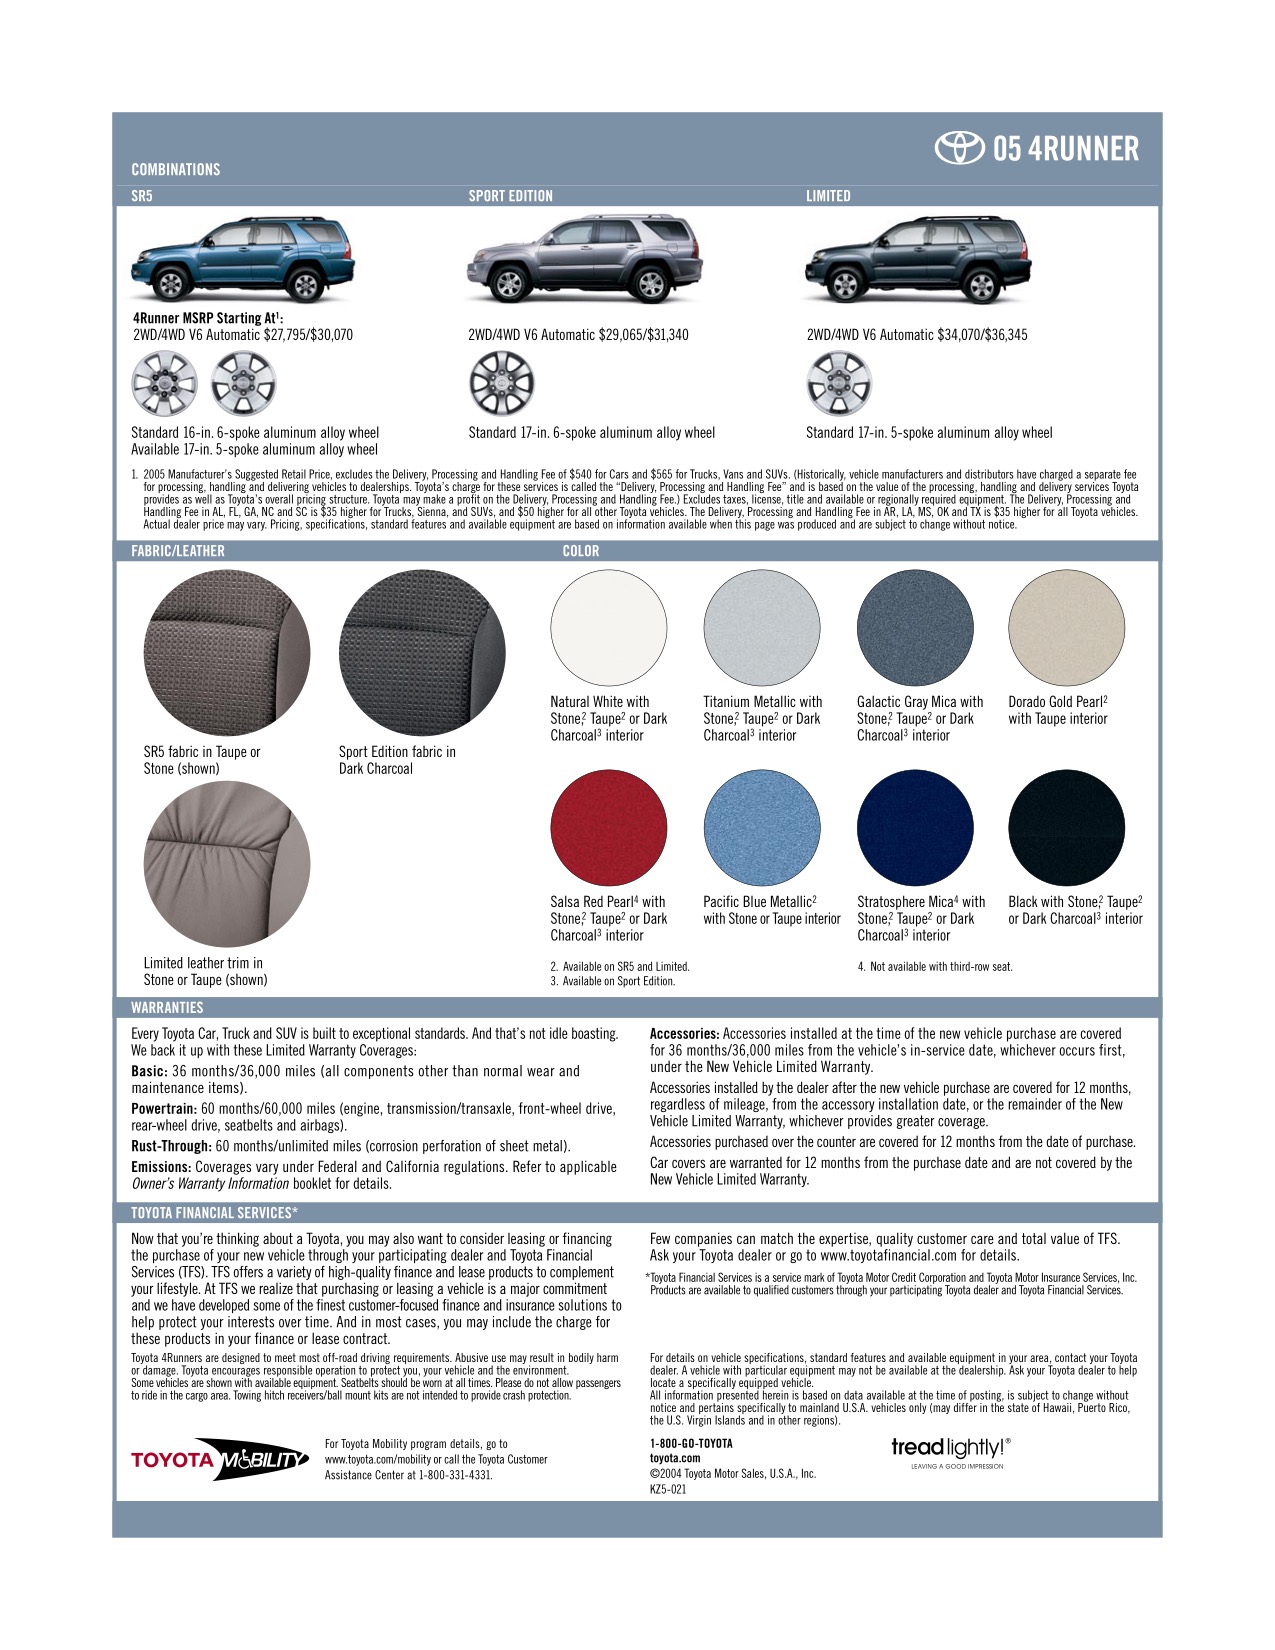 2005 Toyota 4Runner Brochure Page 5